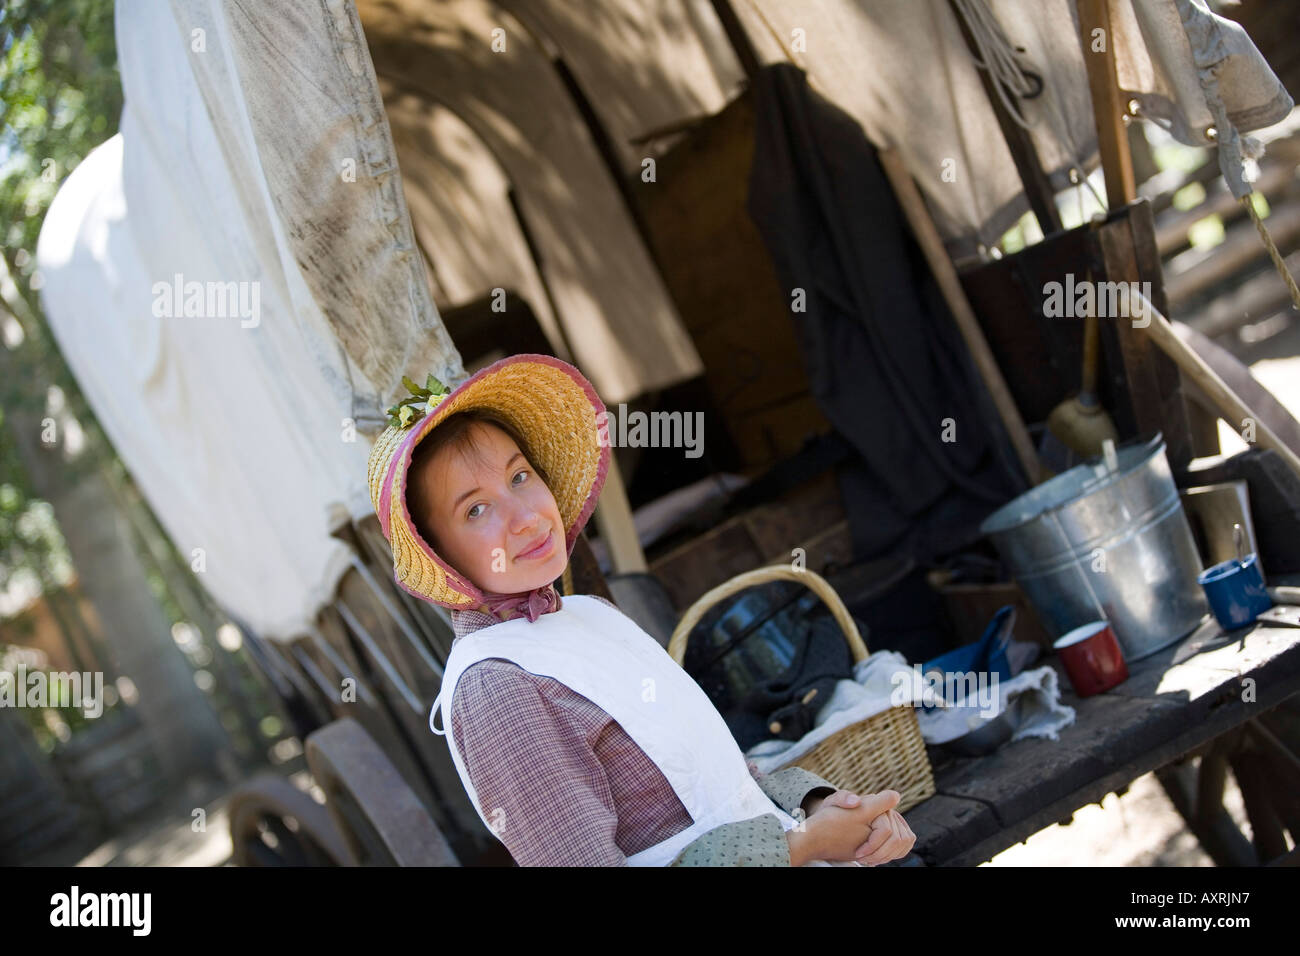 Woman in old fashioned clothing beside covered wagon Stock Photo